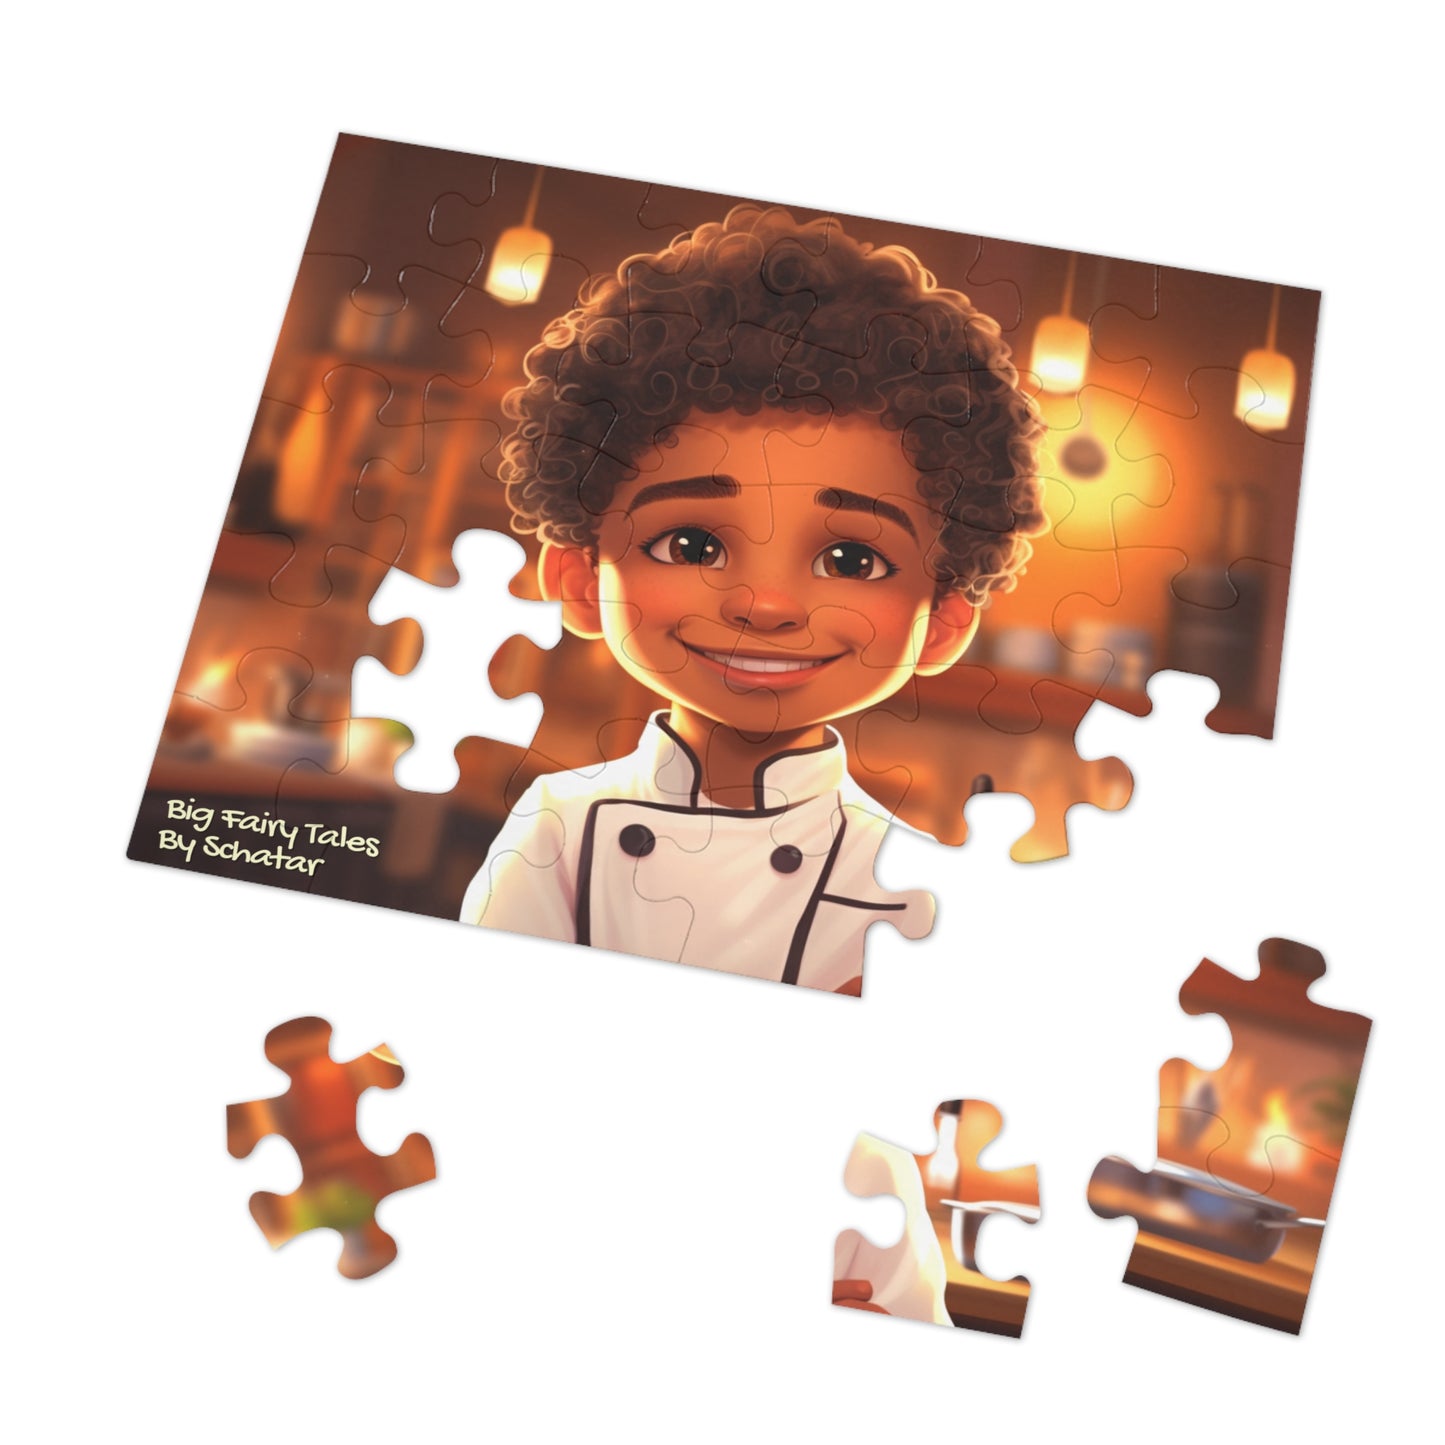 Restauranteur - Big Little Professionals Puzzle 20 From Big Fairy Tales By Schatar